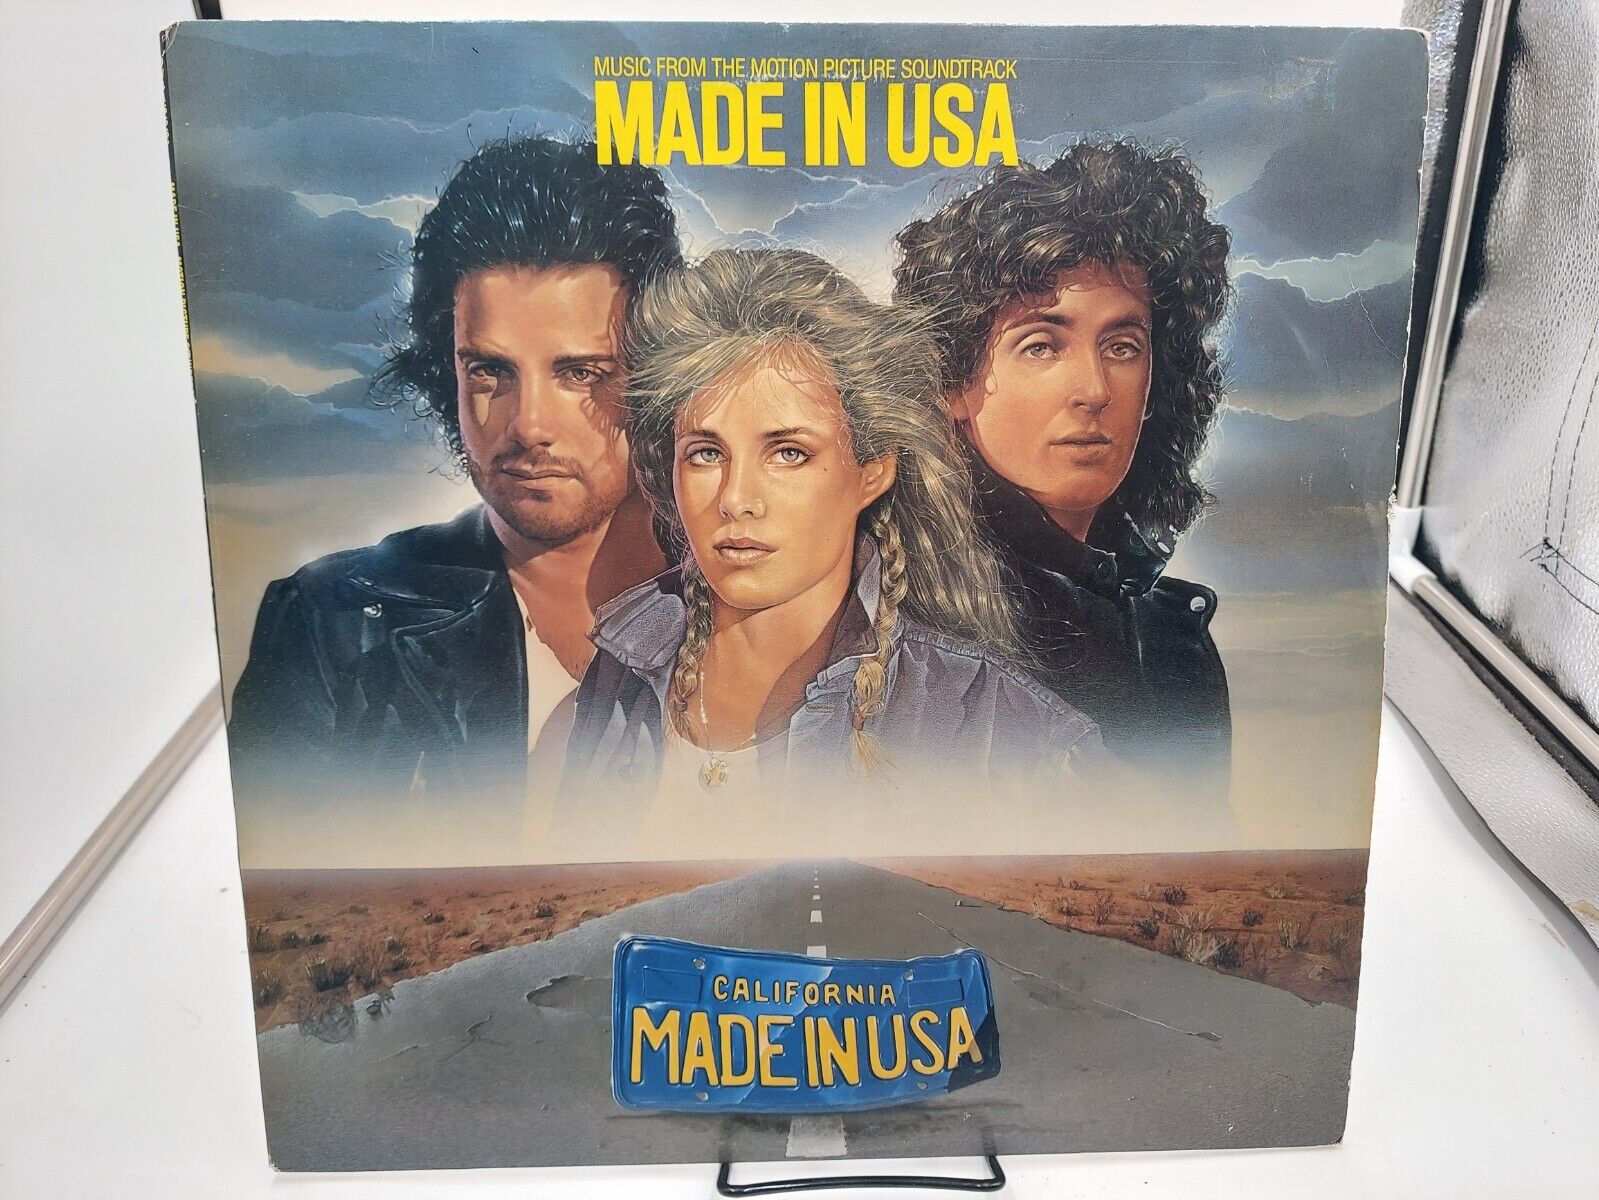 MADE IN USA SOUNDTRACK LP Record 1987 PROMO Chrysalis Ultrasonic Clean NM cVG+